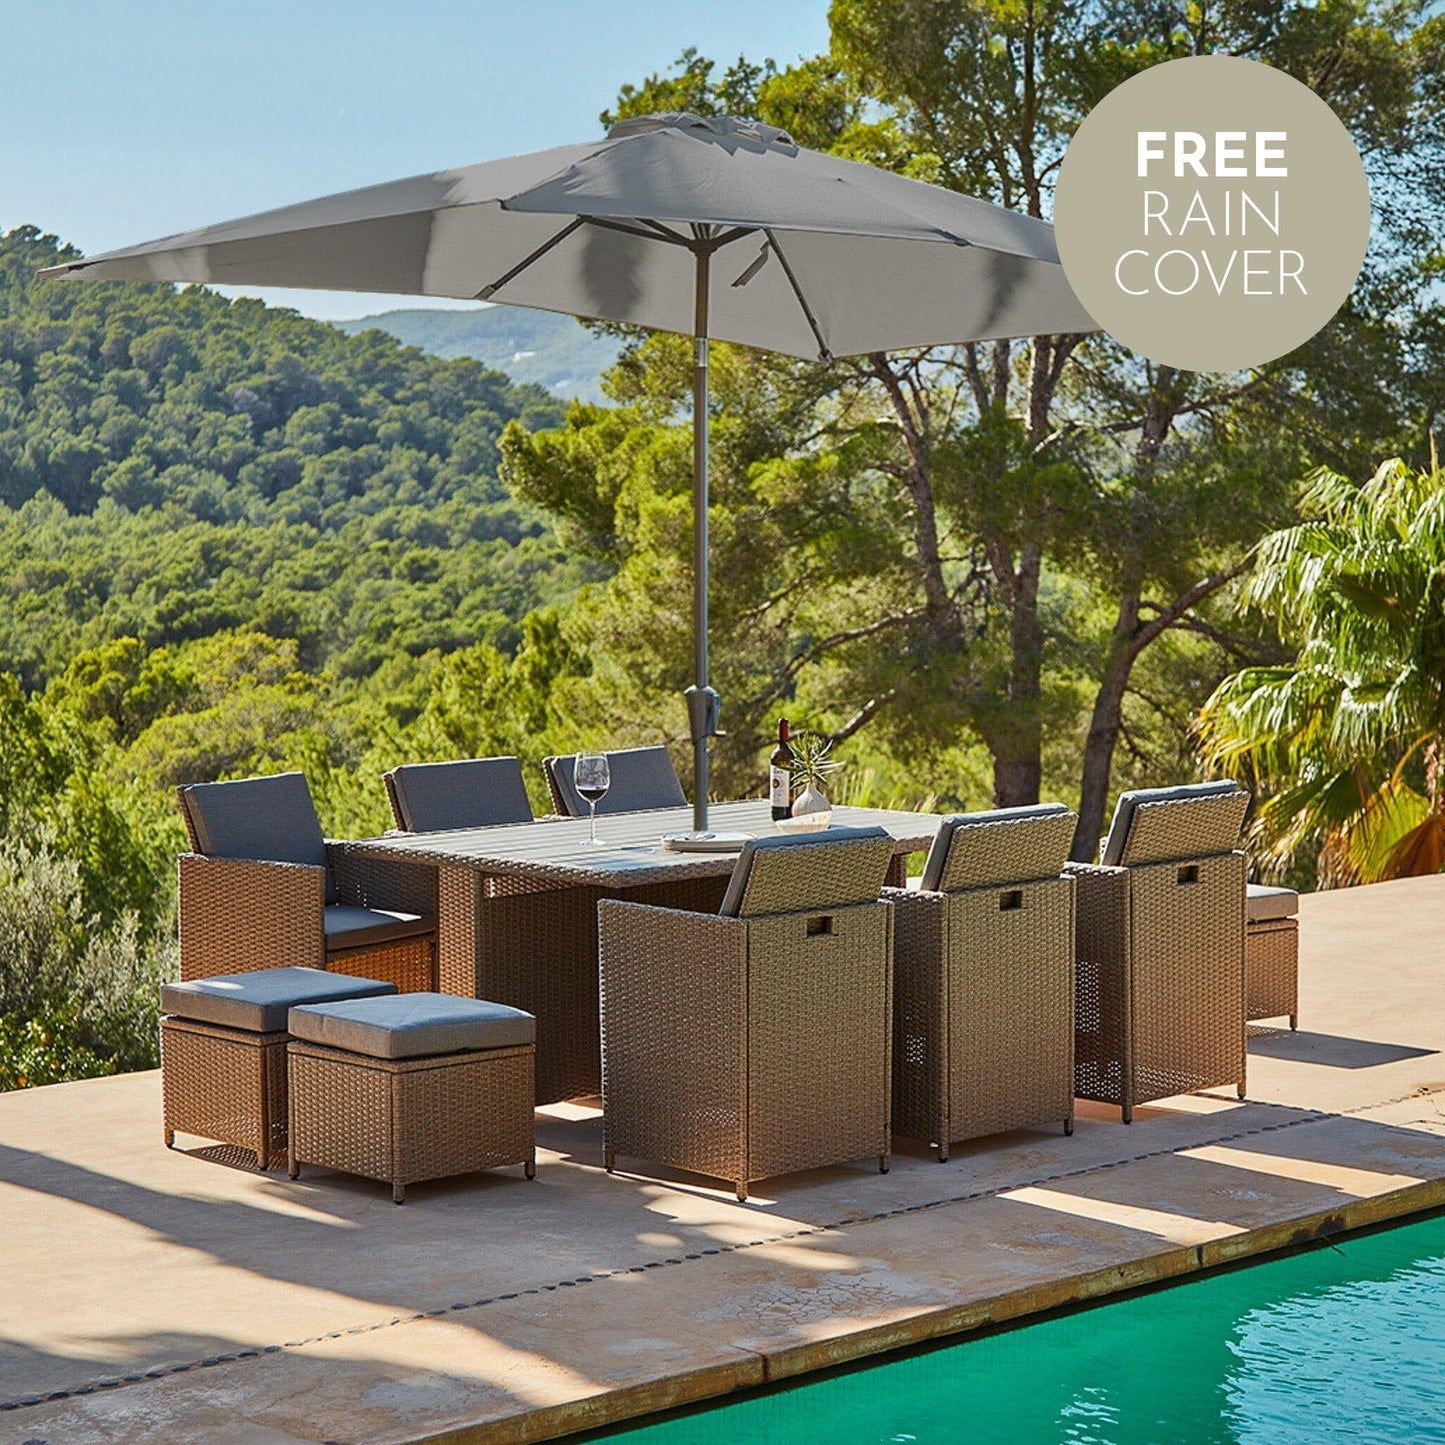 10 Seater Rattan Cube Outdoor Dining Set with Grey Parasol- Natural Brown Weave Polywood Top